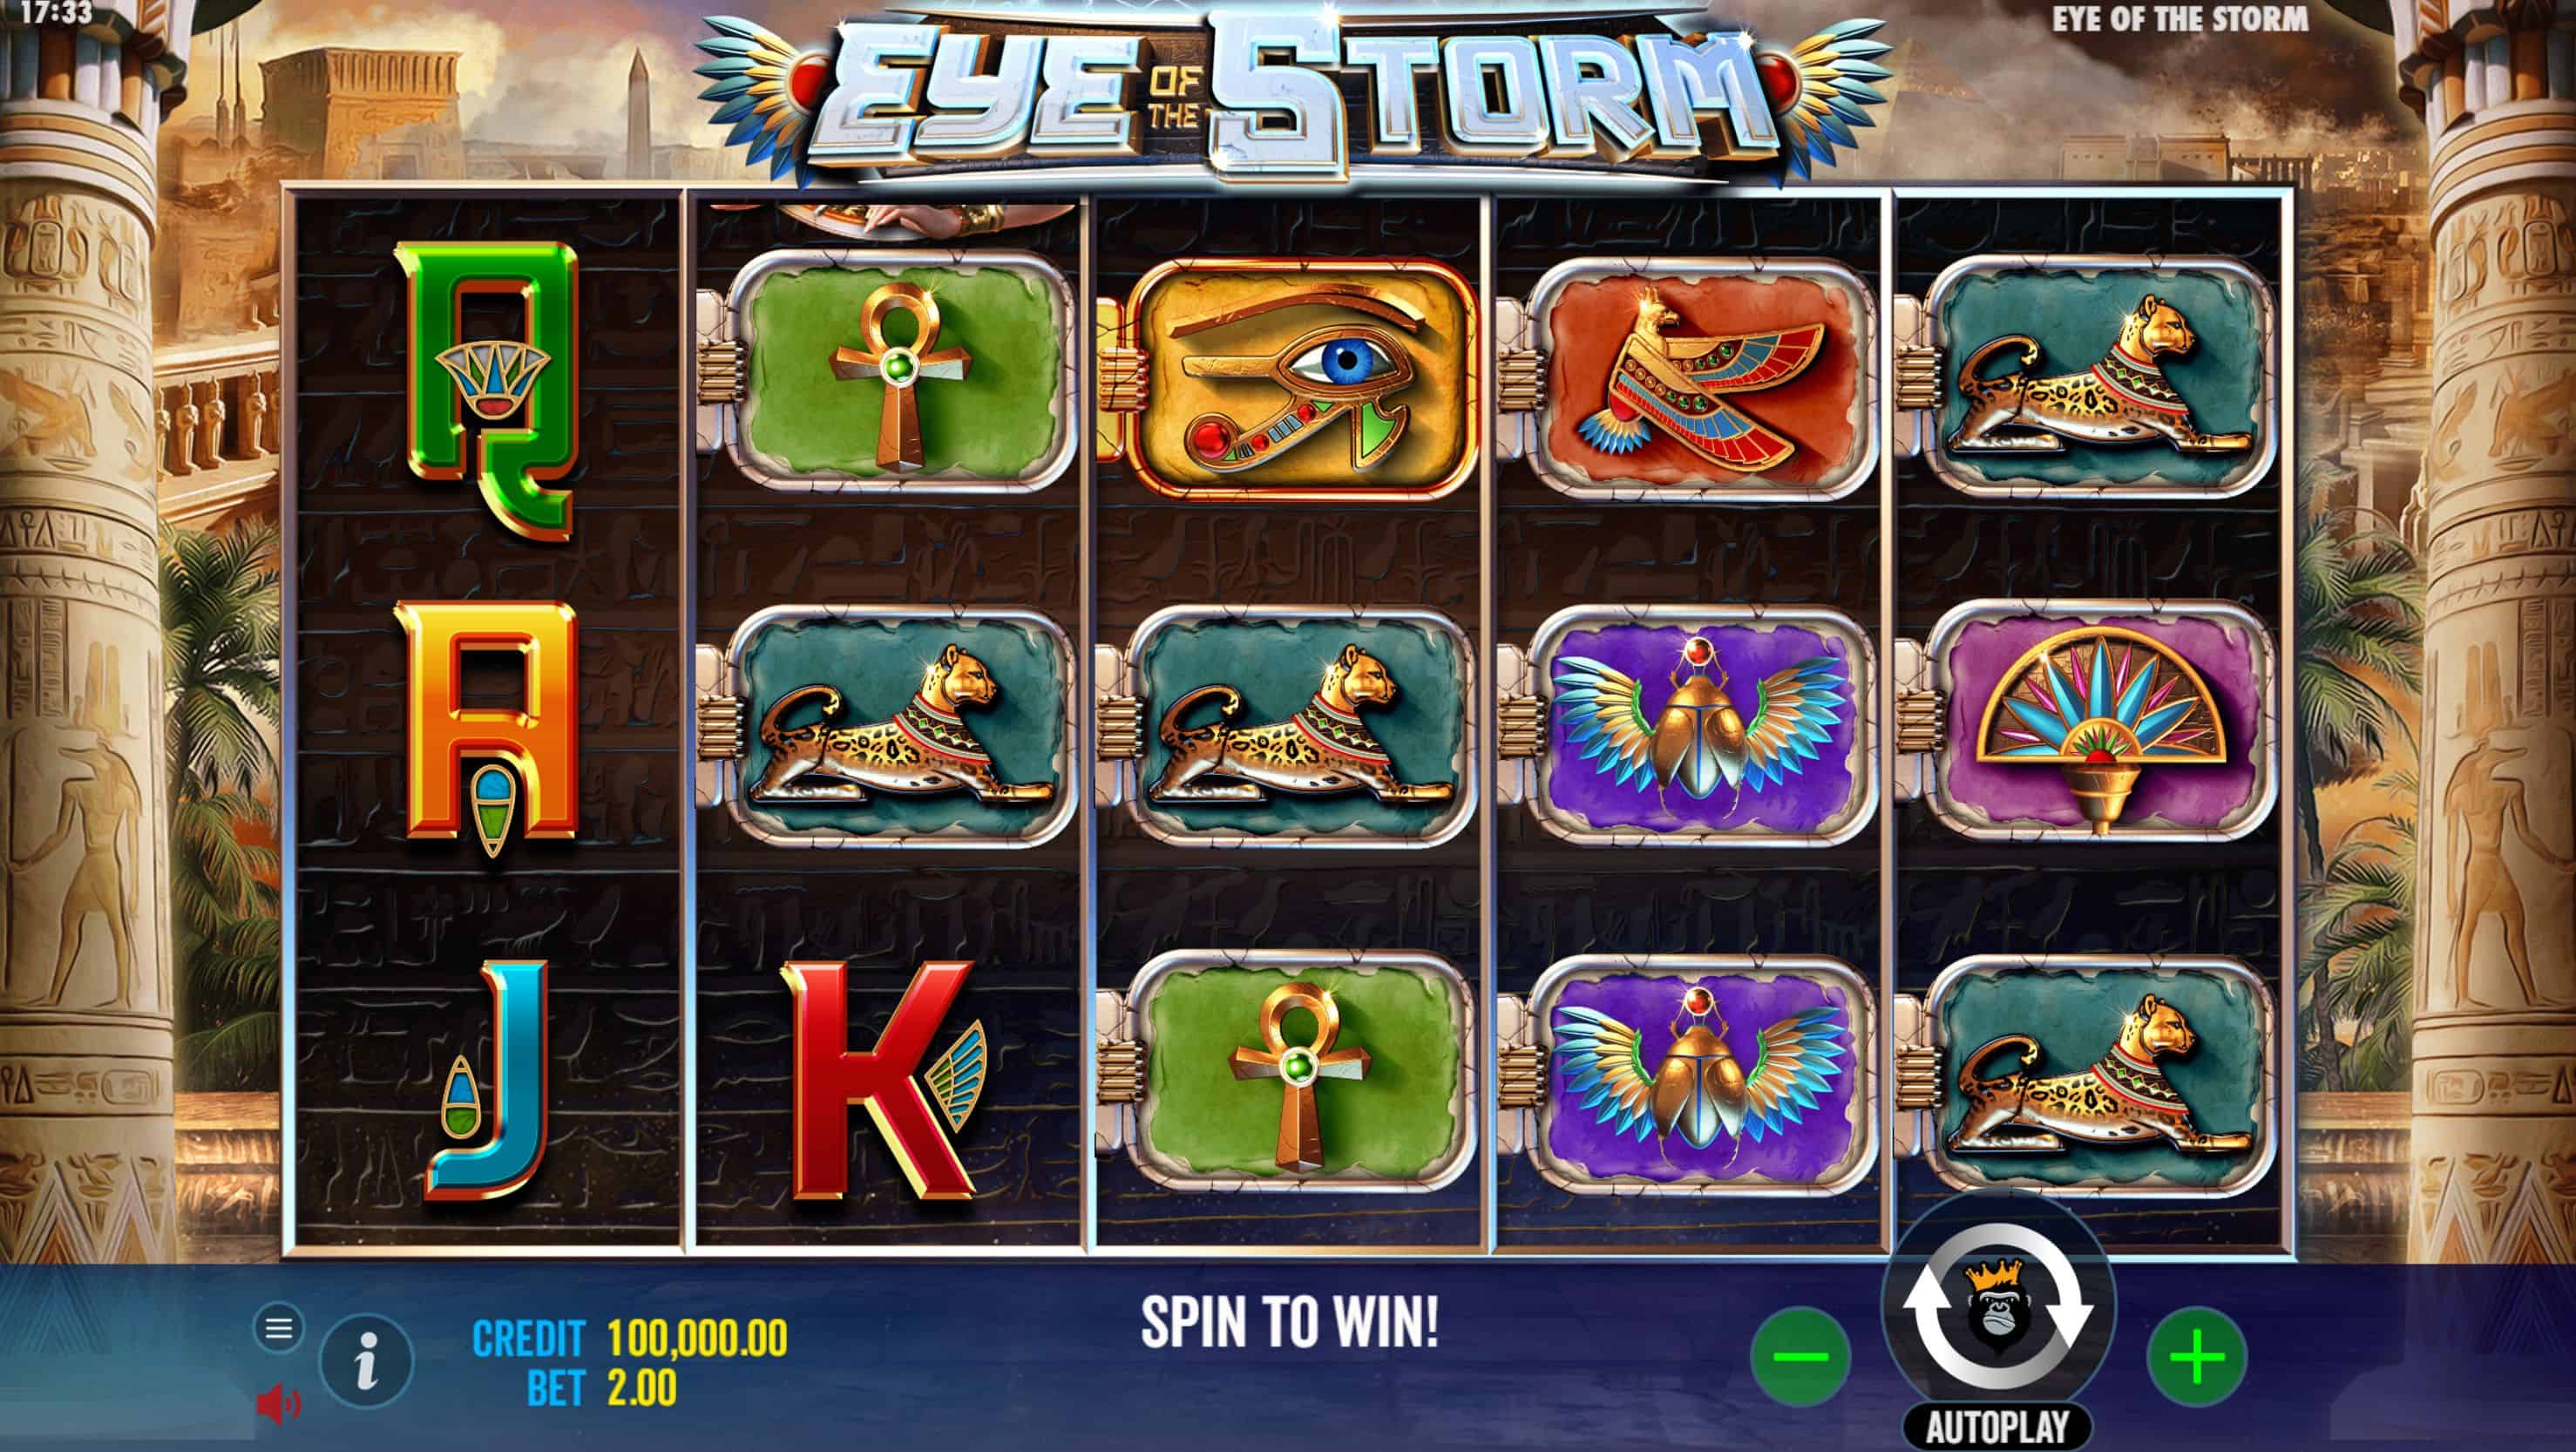 Eye of the Storm Slot Game Free Play at Casino Ireland 01